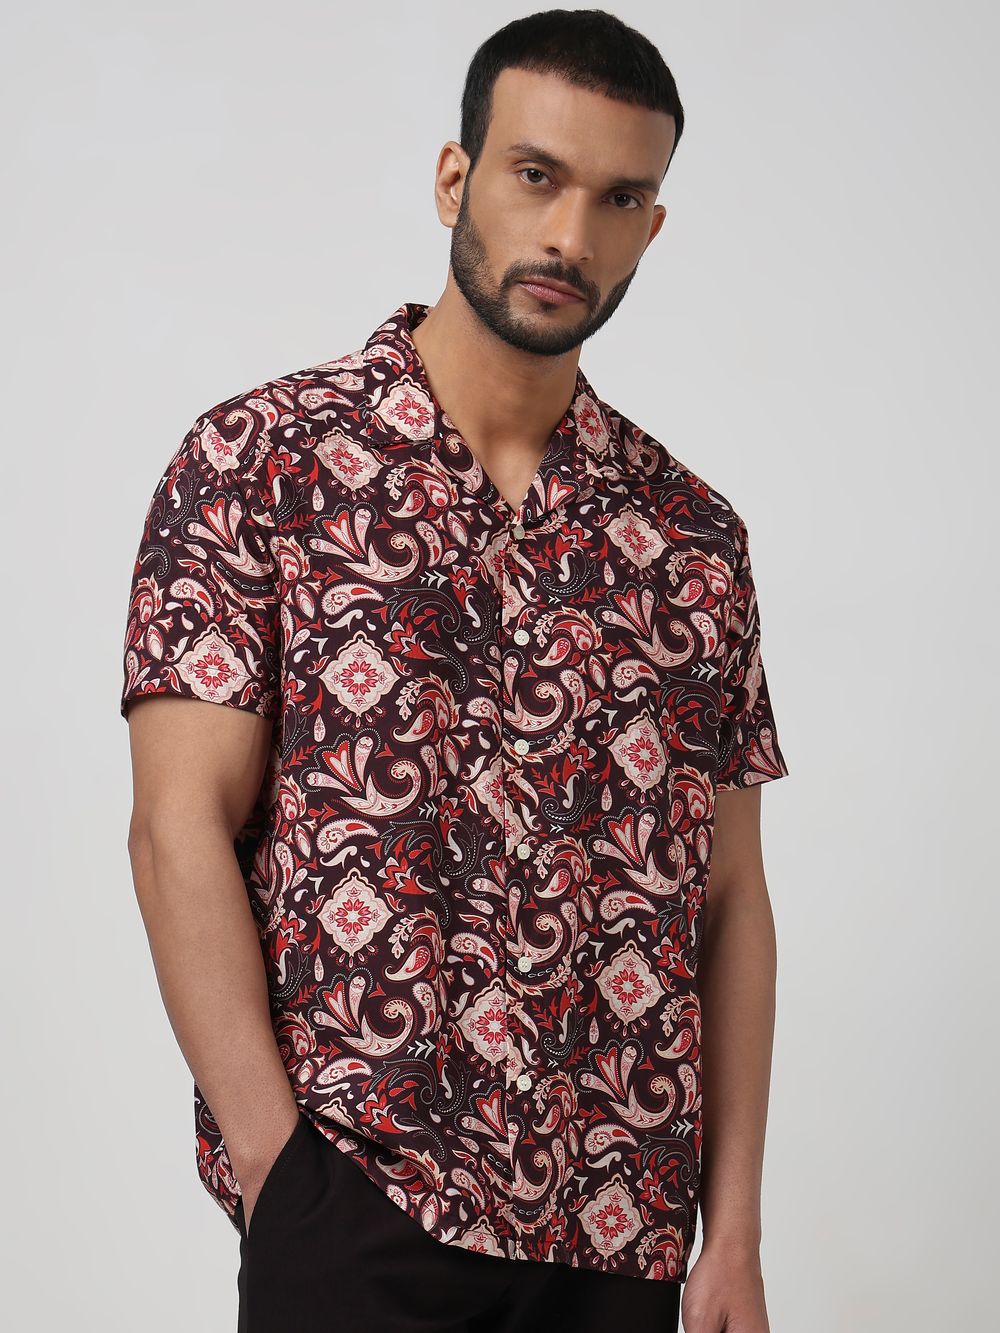 Maroon Digital Print Relaxed Fit Casual Shirt